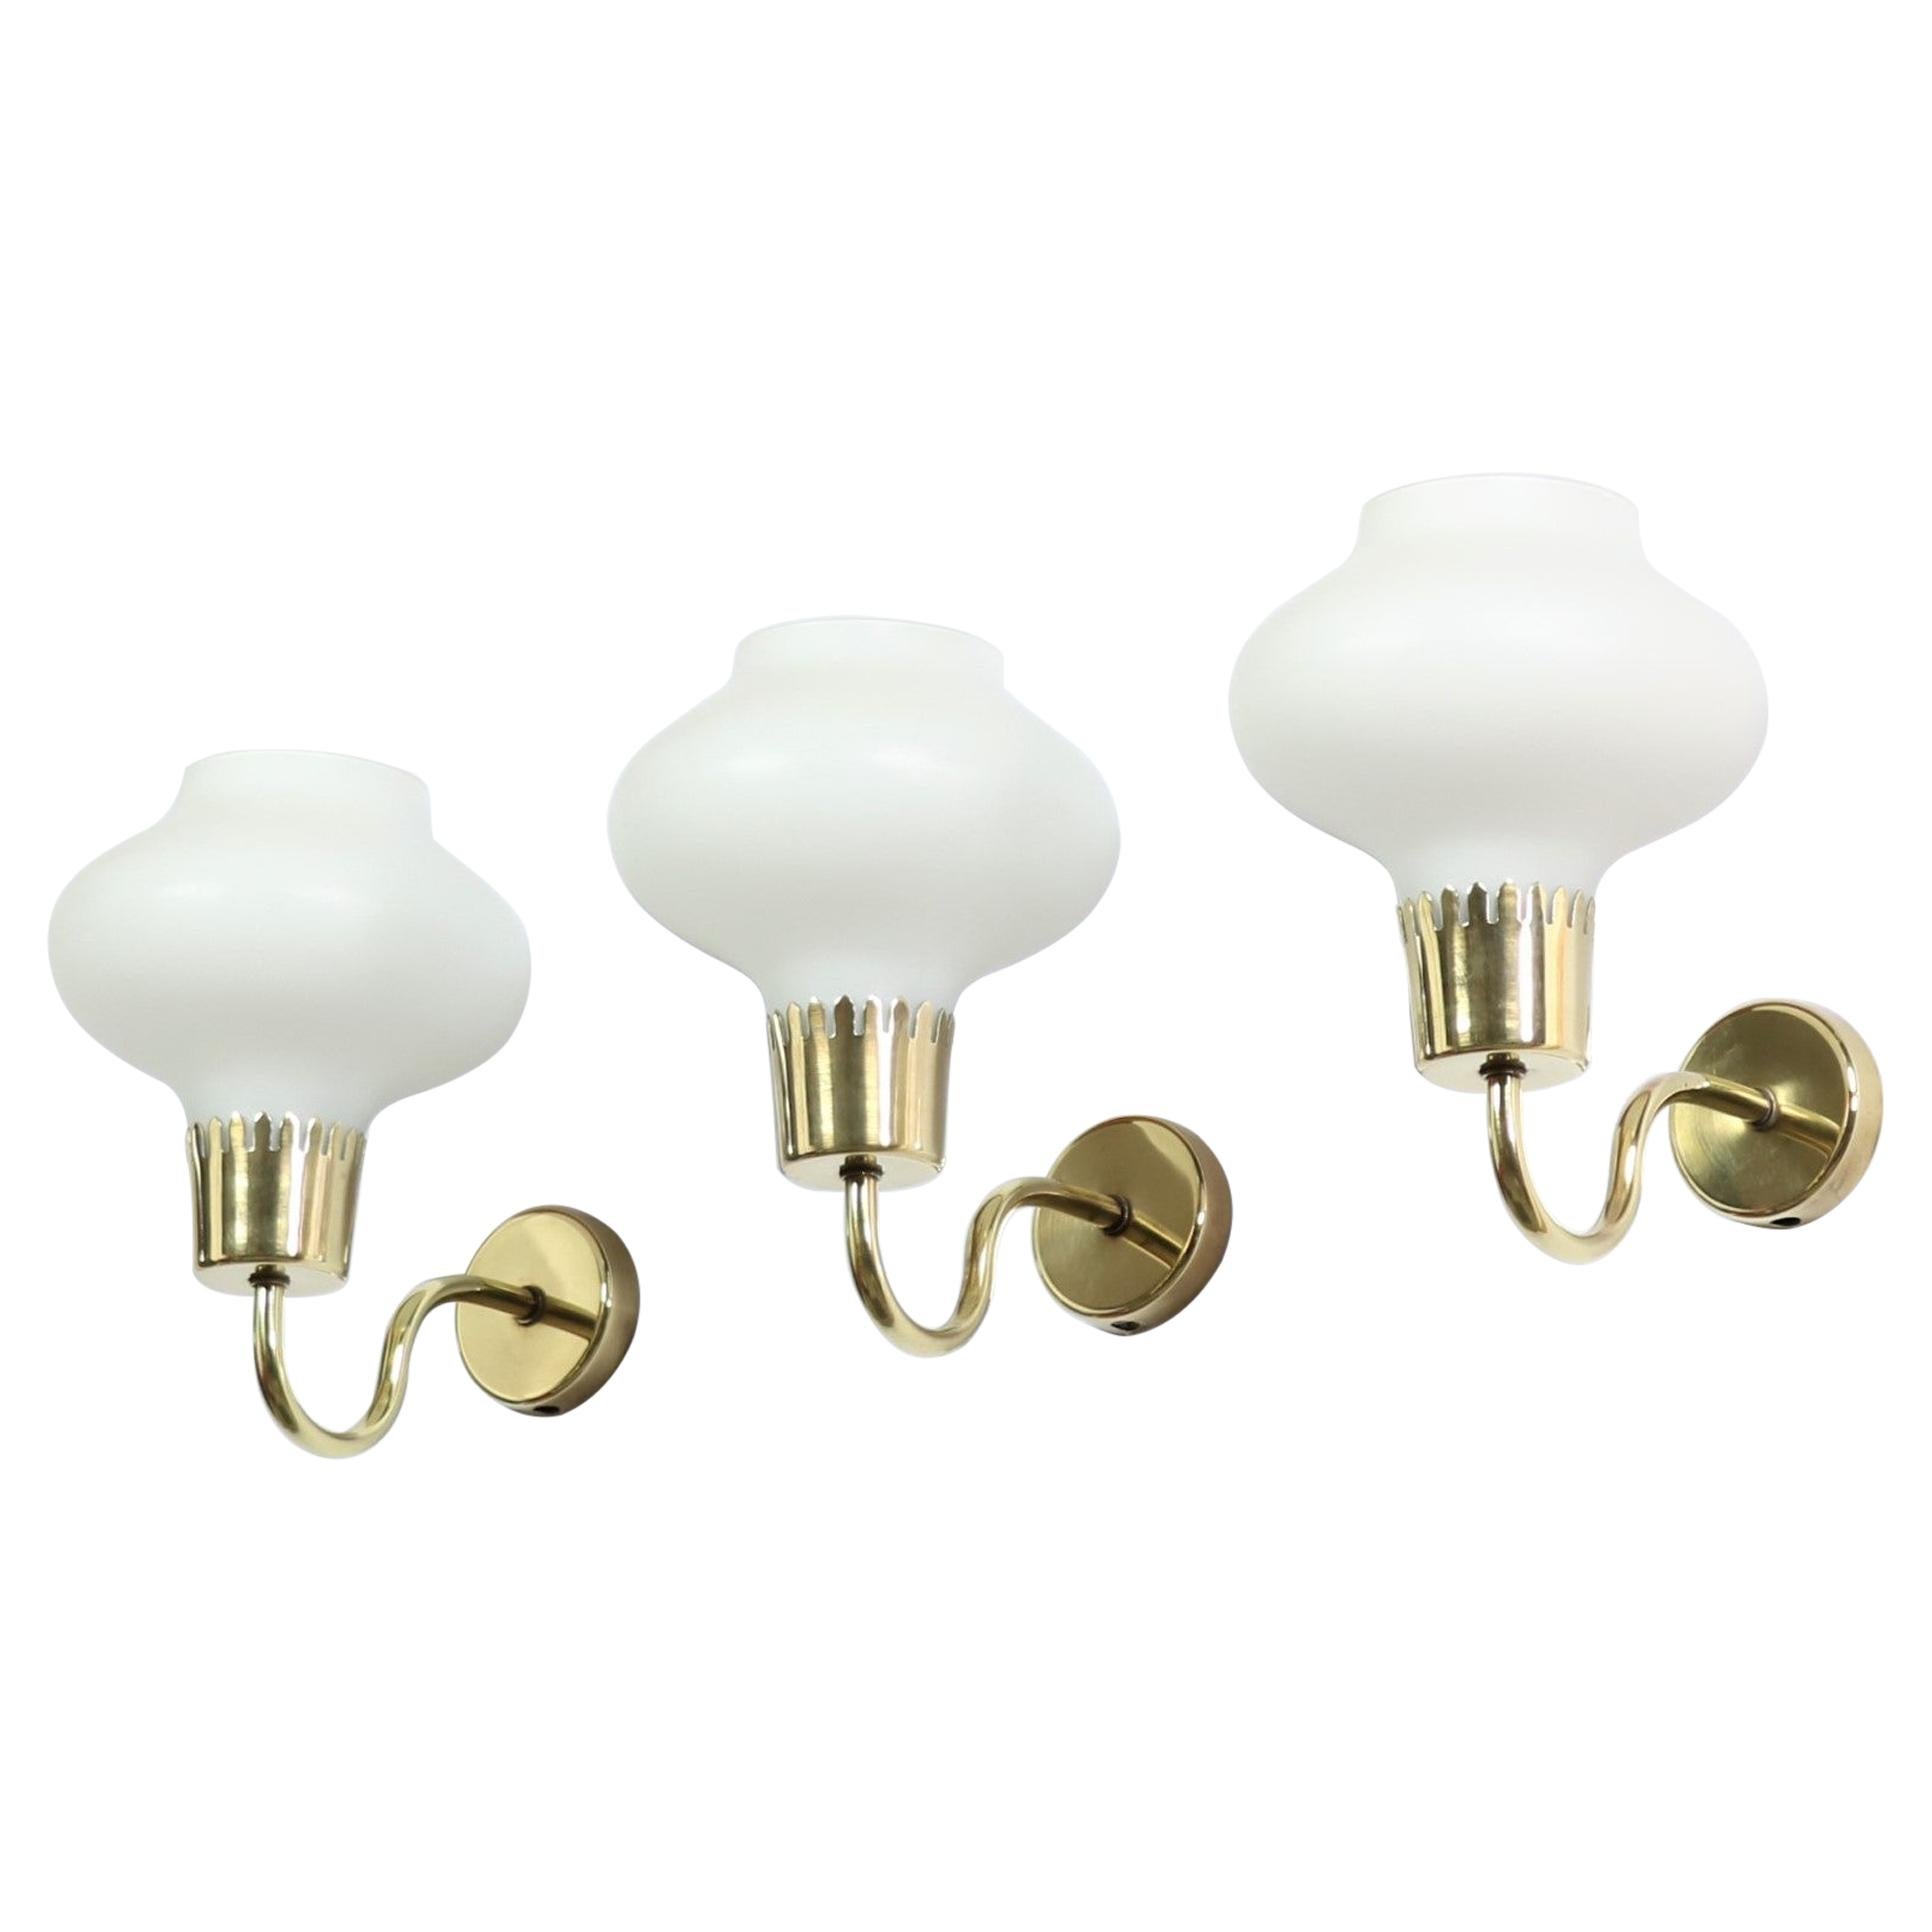 Set of Danish Modern Brass and Opal Glass Wall Sconces by Acton Bjorn, 1950s For Sale